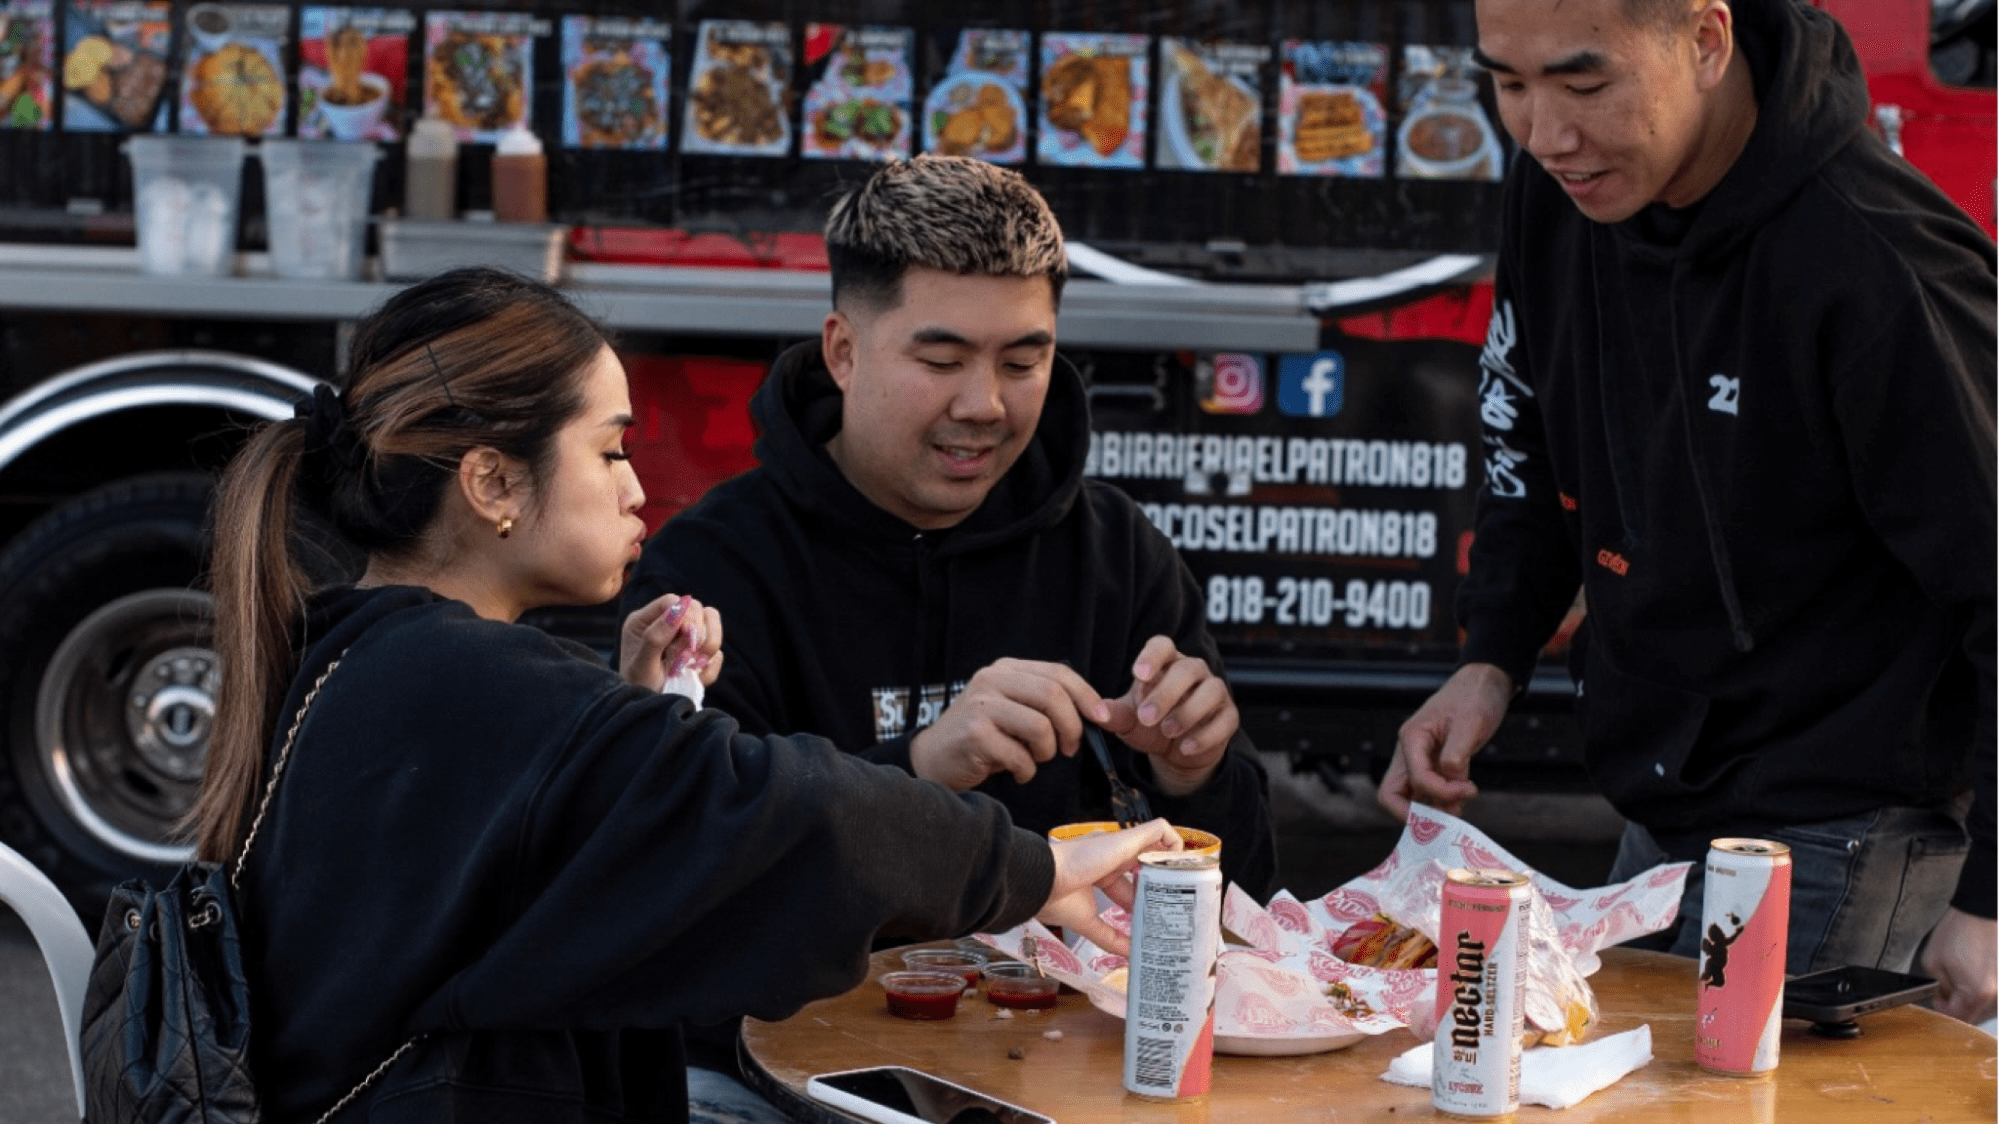 People eating in front of a food truck